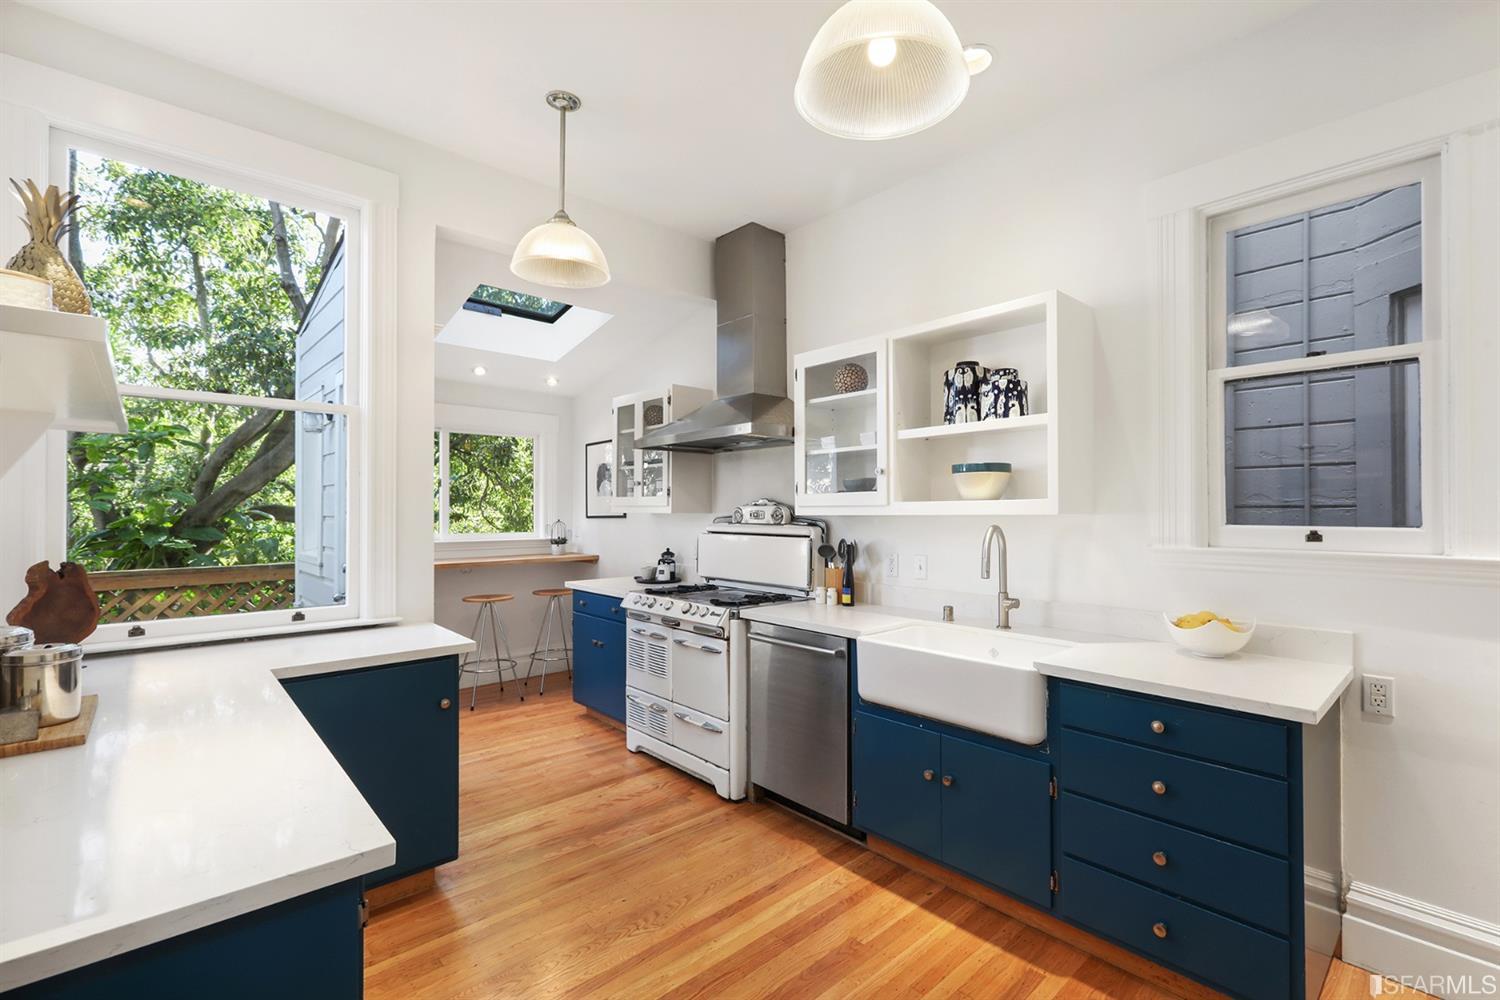 Property Photo: Kitchen, featuring wood floors and large windows